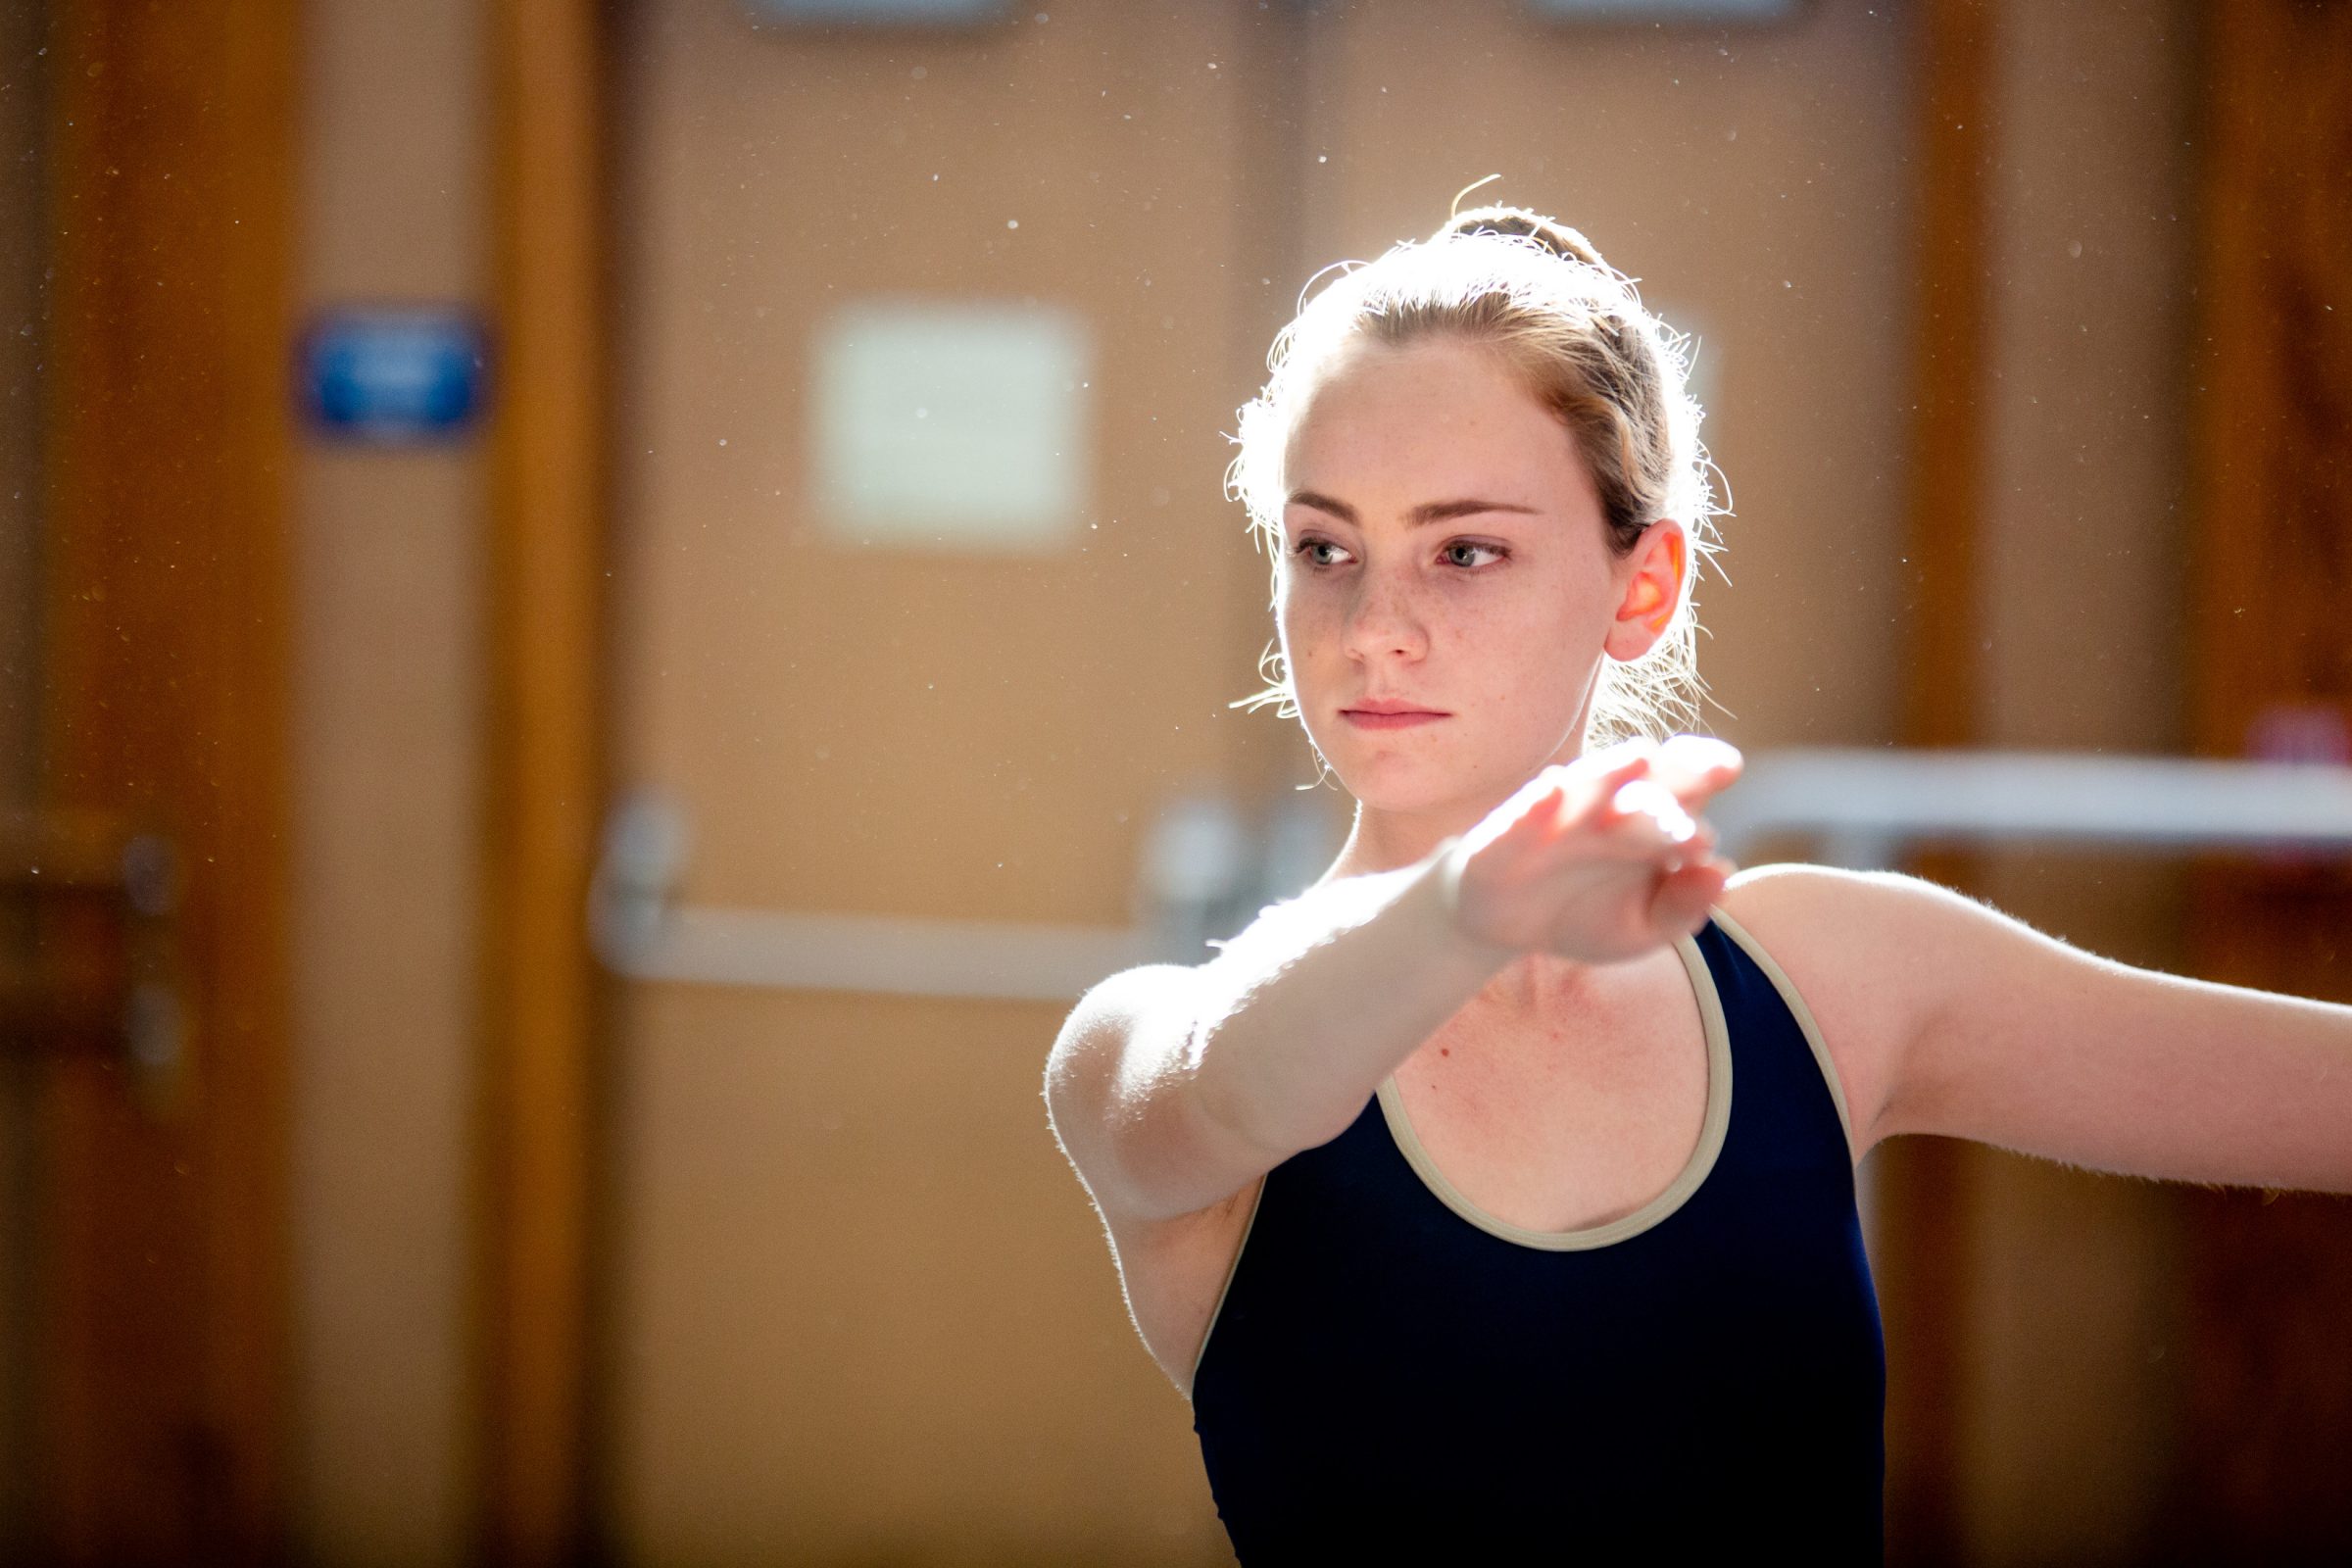 Female dance student holding arm out and focusing on her dance practice.